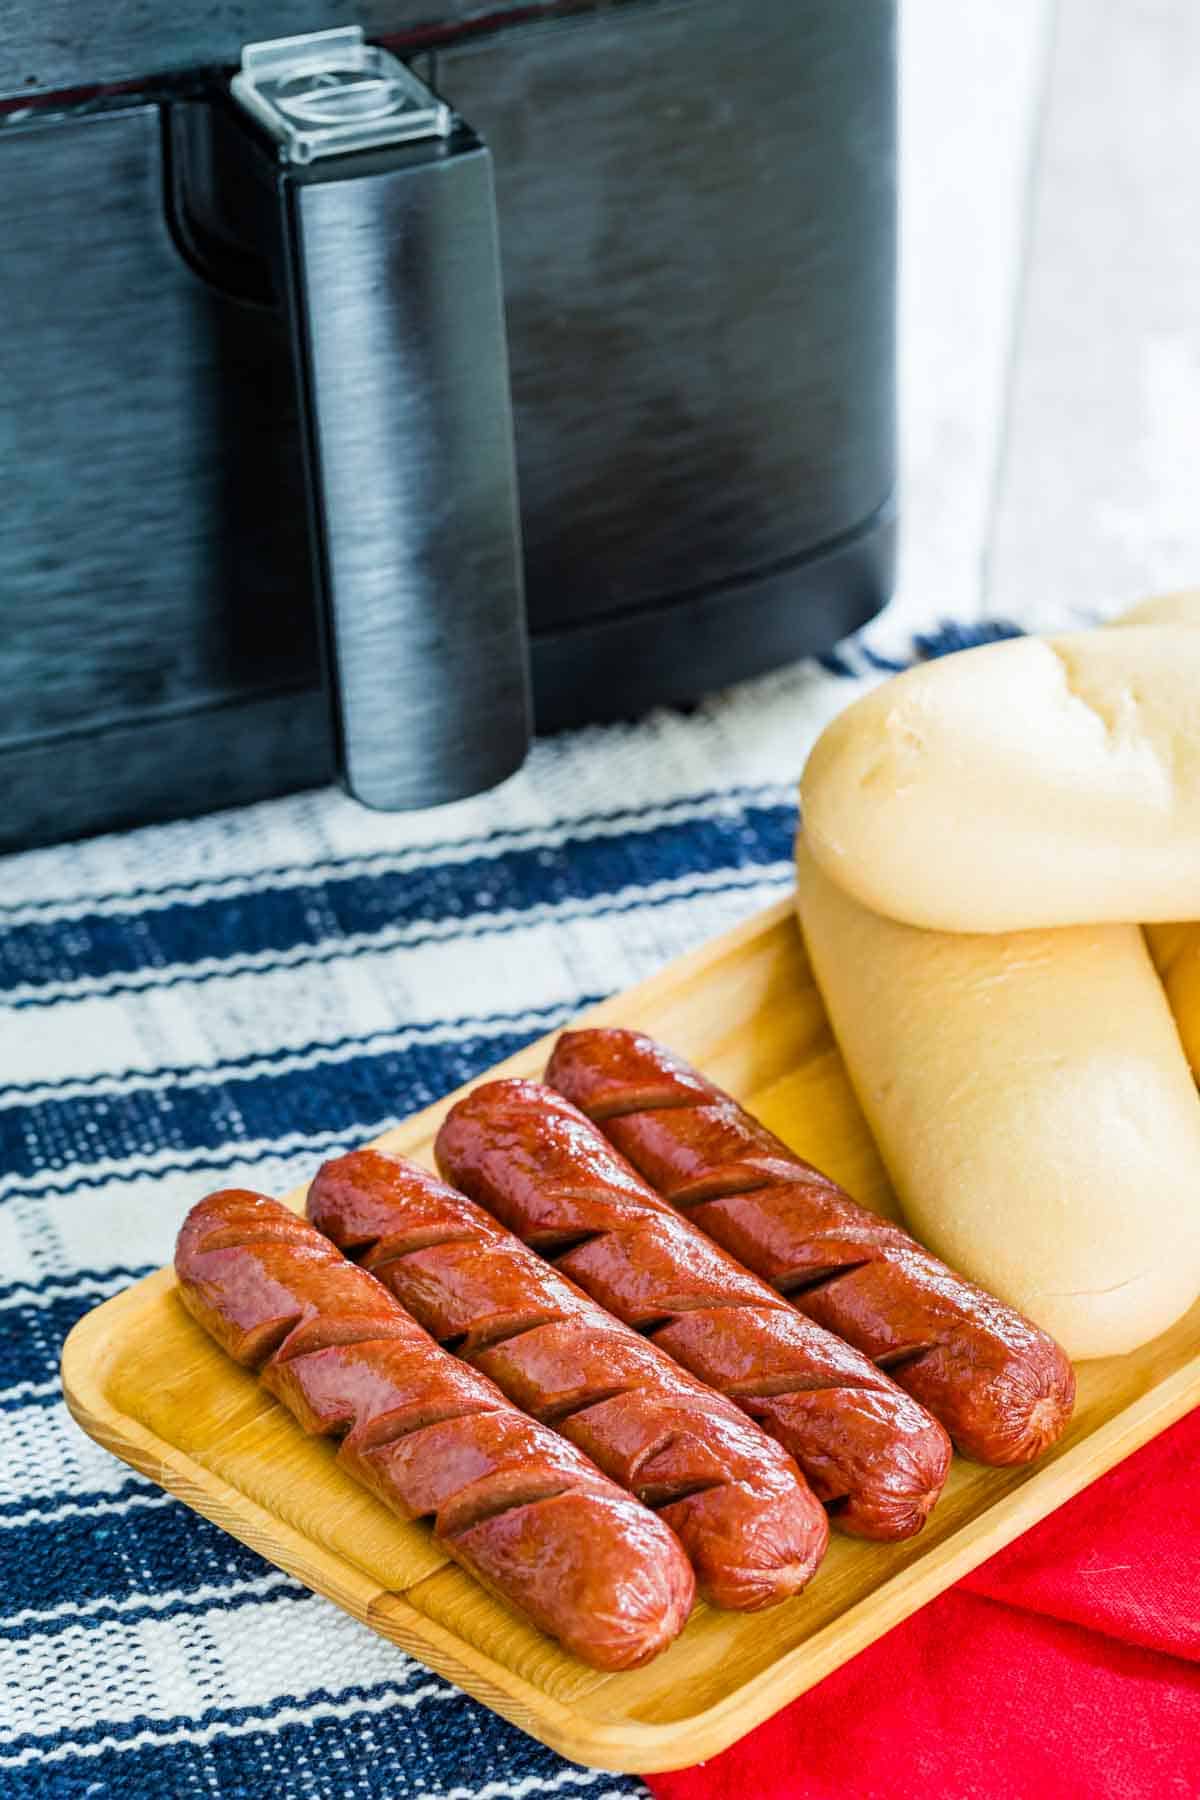 Cooked air fryer hot dogs are shown on a tray with buns on the side.